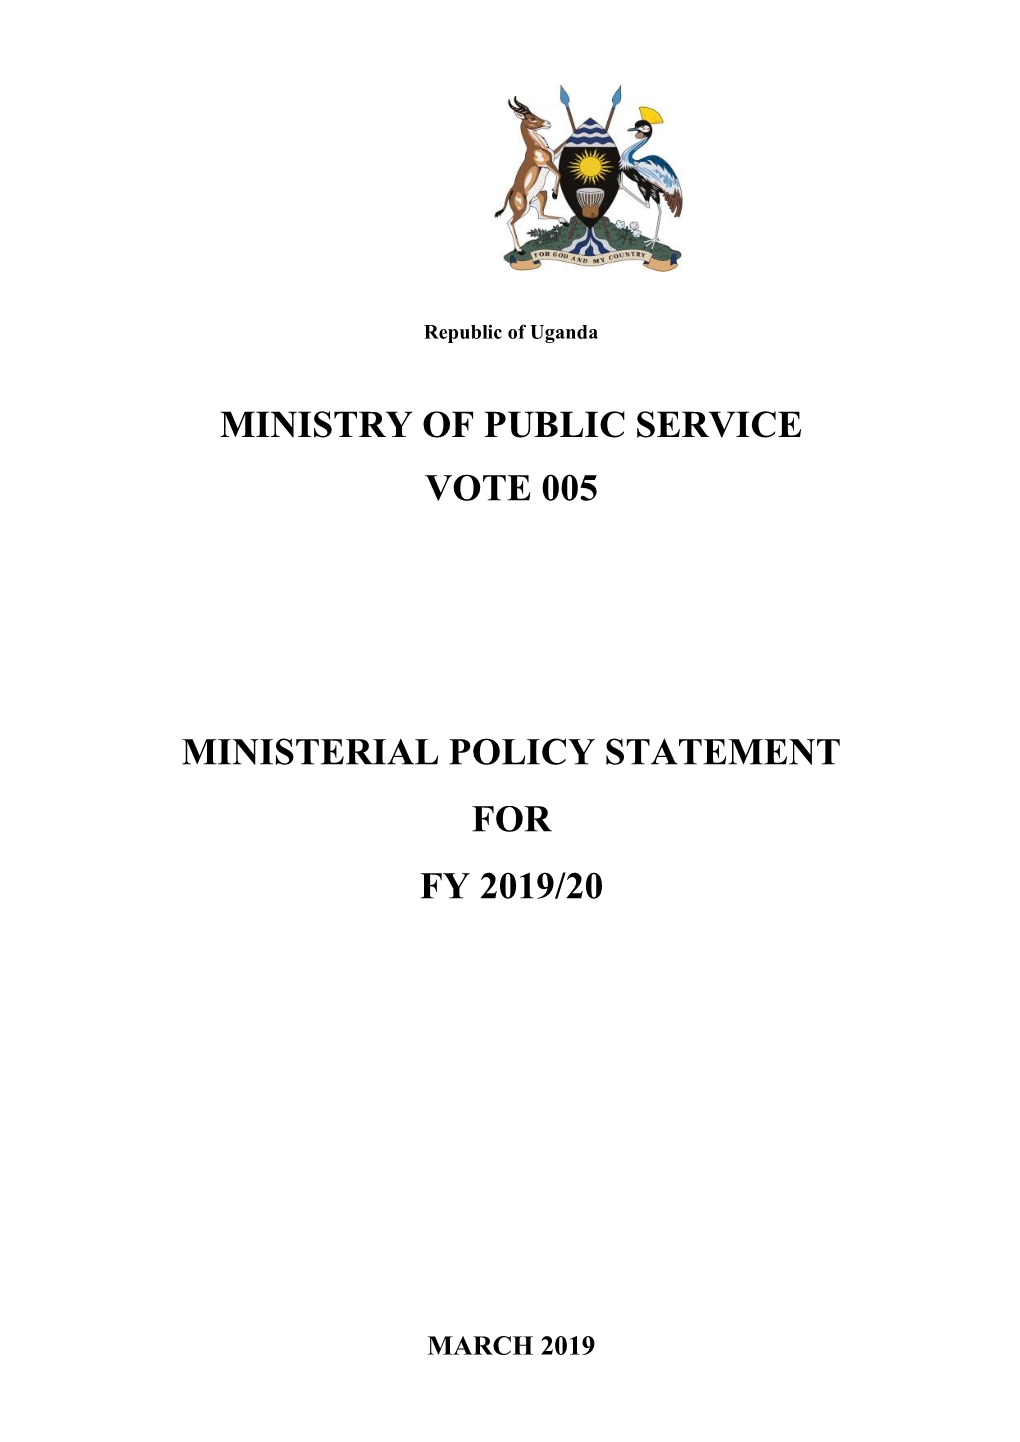 Ministry of Public Service Vote 005 Ministerial Policy Statement for Fy